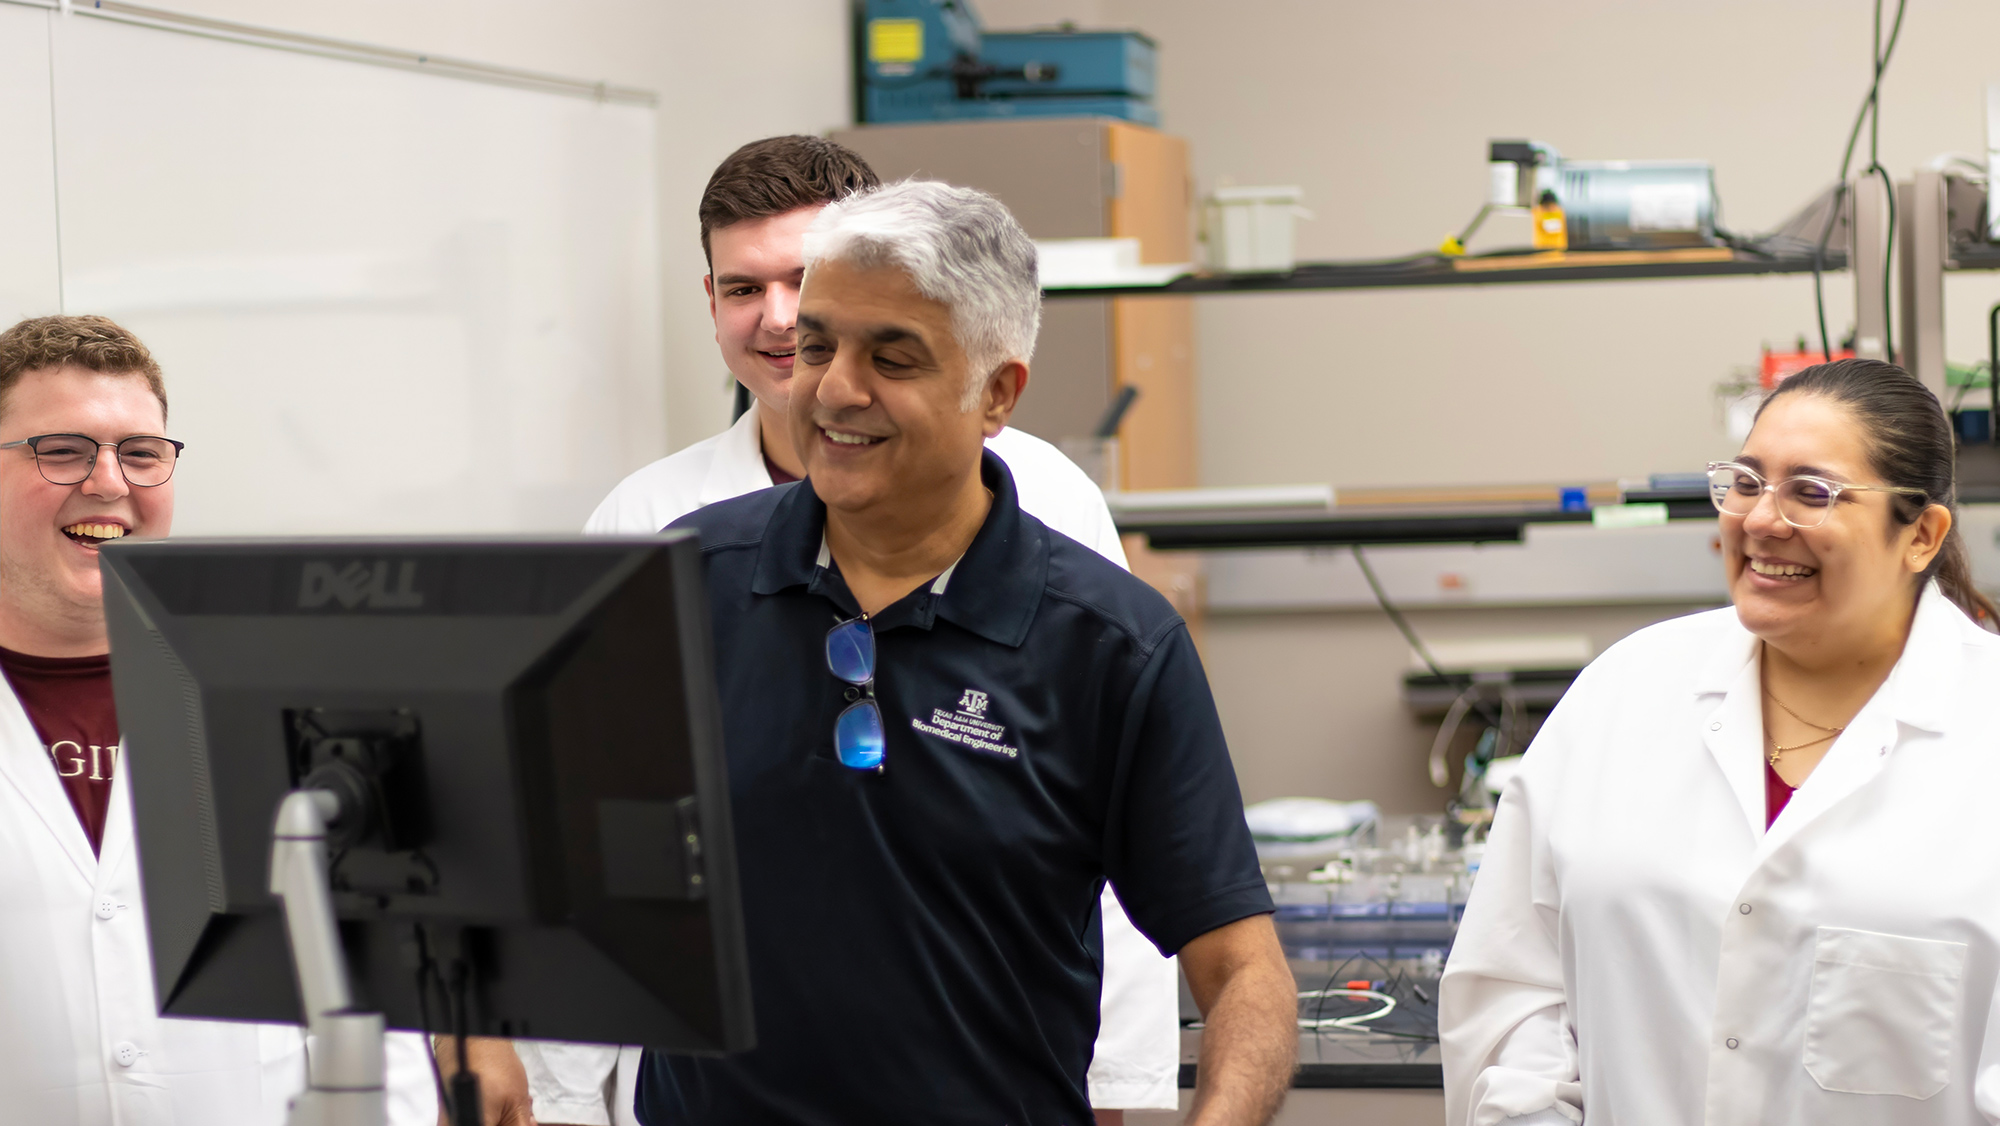 Dr. Balakrishna Haridas using a simulator to test out a pediatric device with his student lab personnel watching behind him.